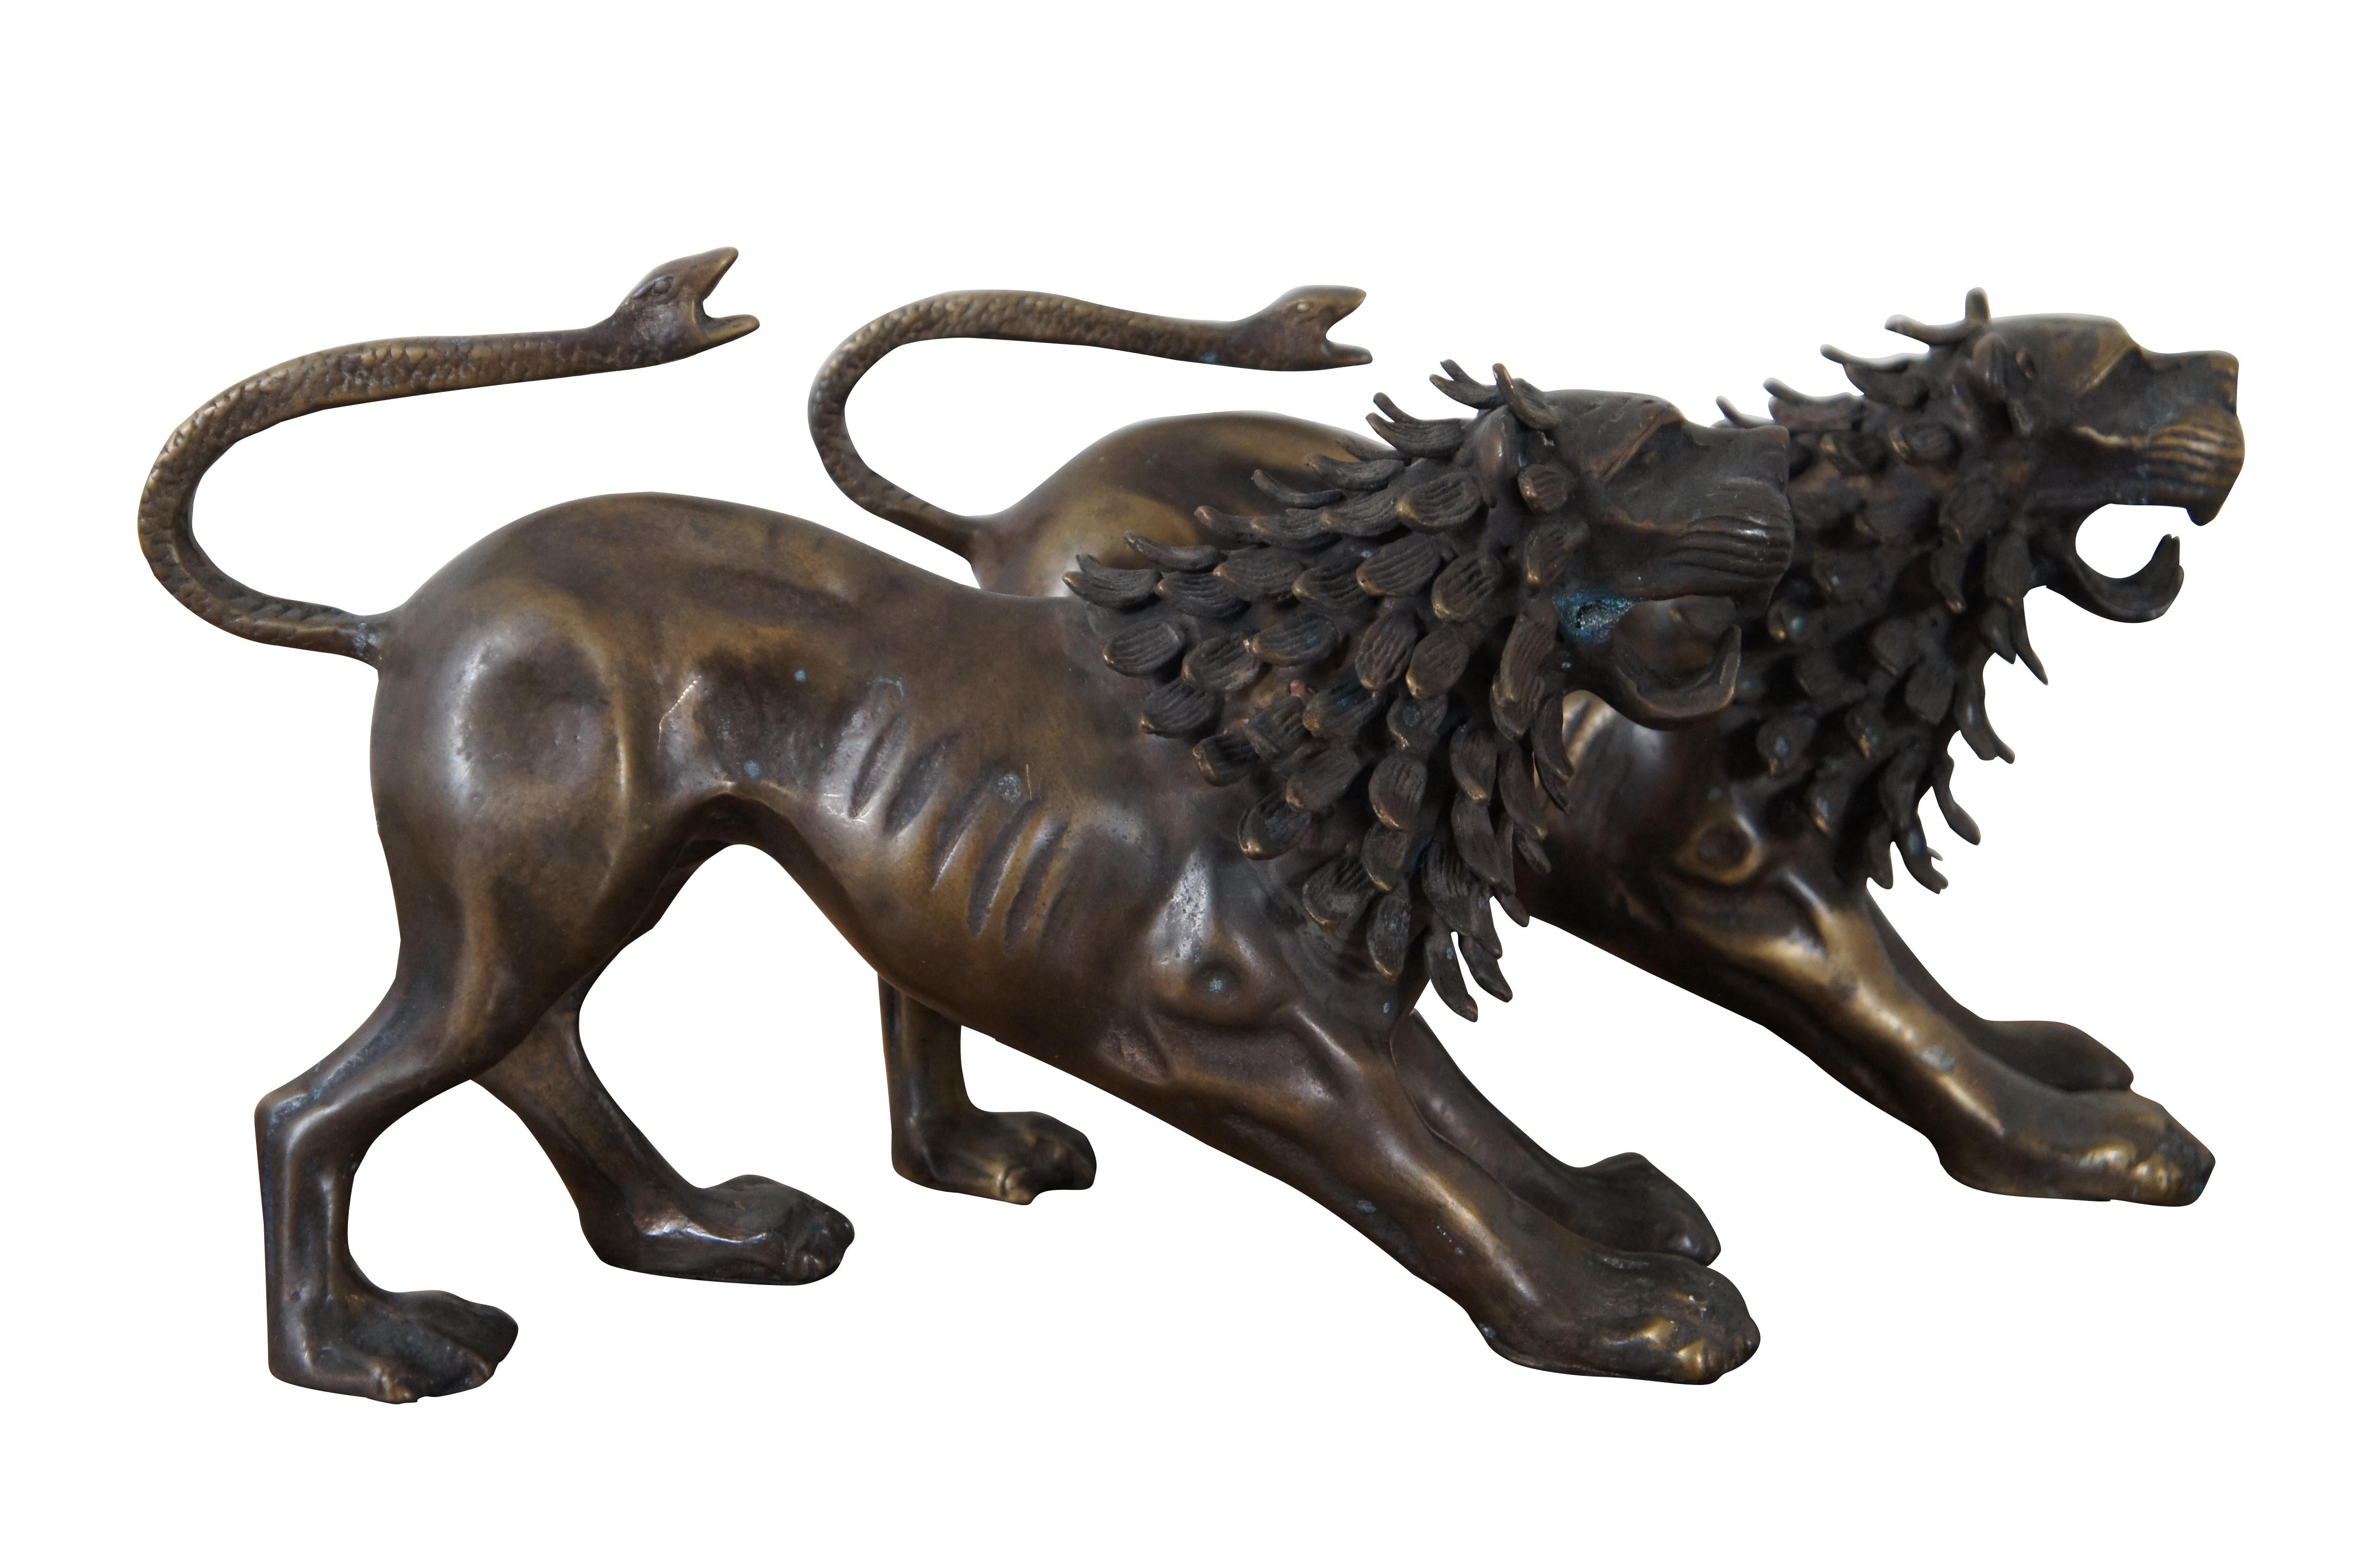 Pair of bronze mythological guardian lion / fu / foo dog figurines with pine cone like manes and snakes for tails. The style and stance are nearly identical to the Chimera of Arezzo – an ancient Etruscan sculpture – however these figures are missing